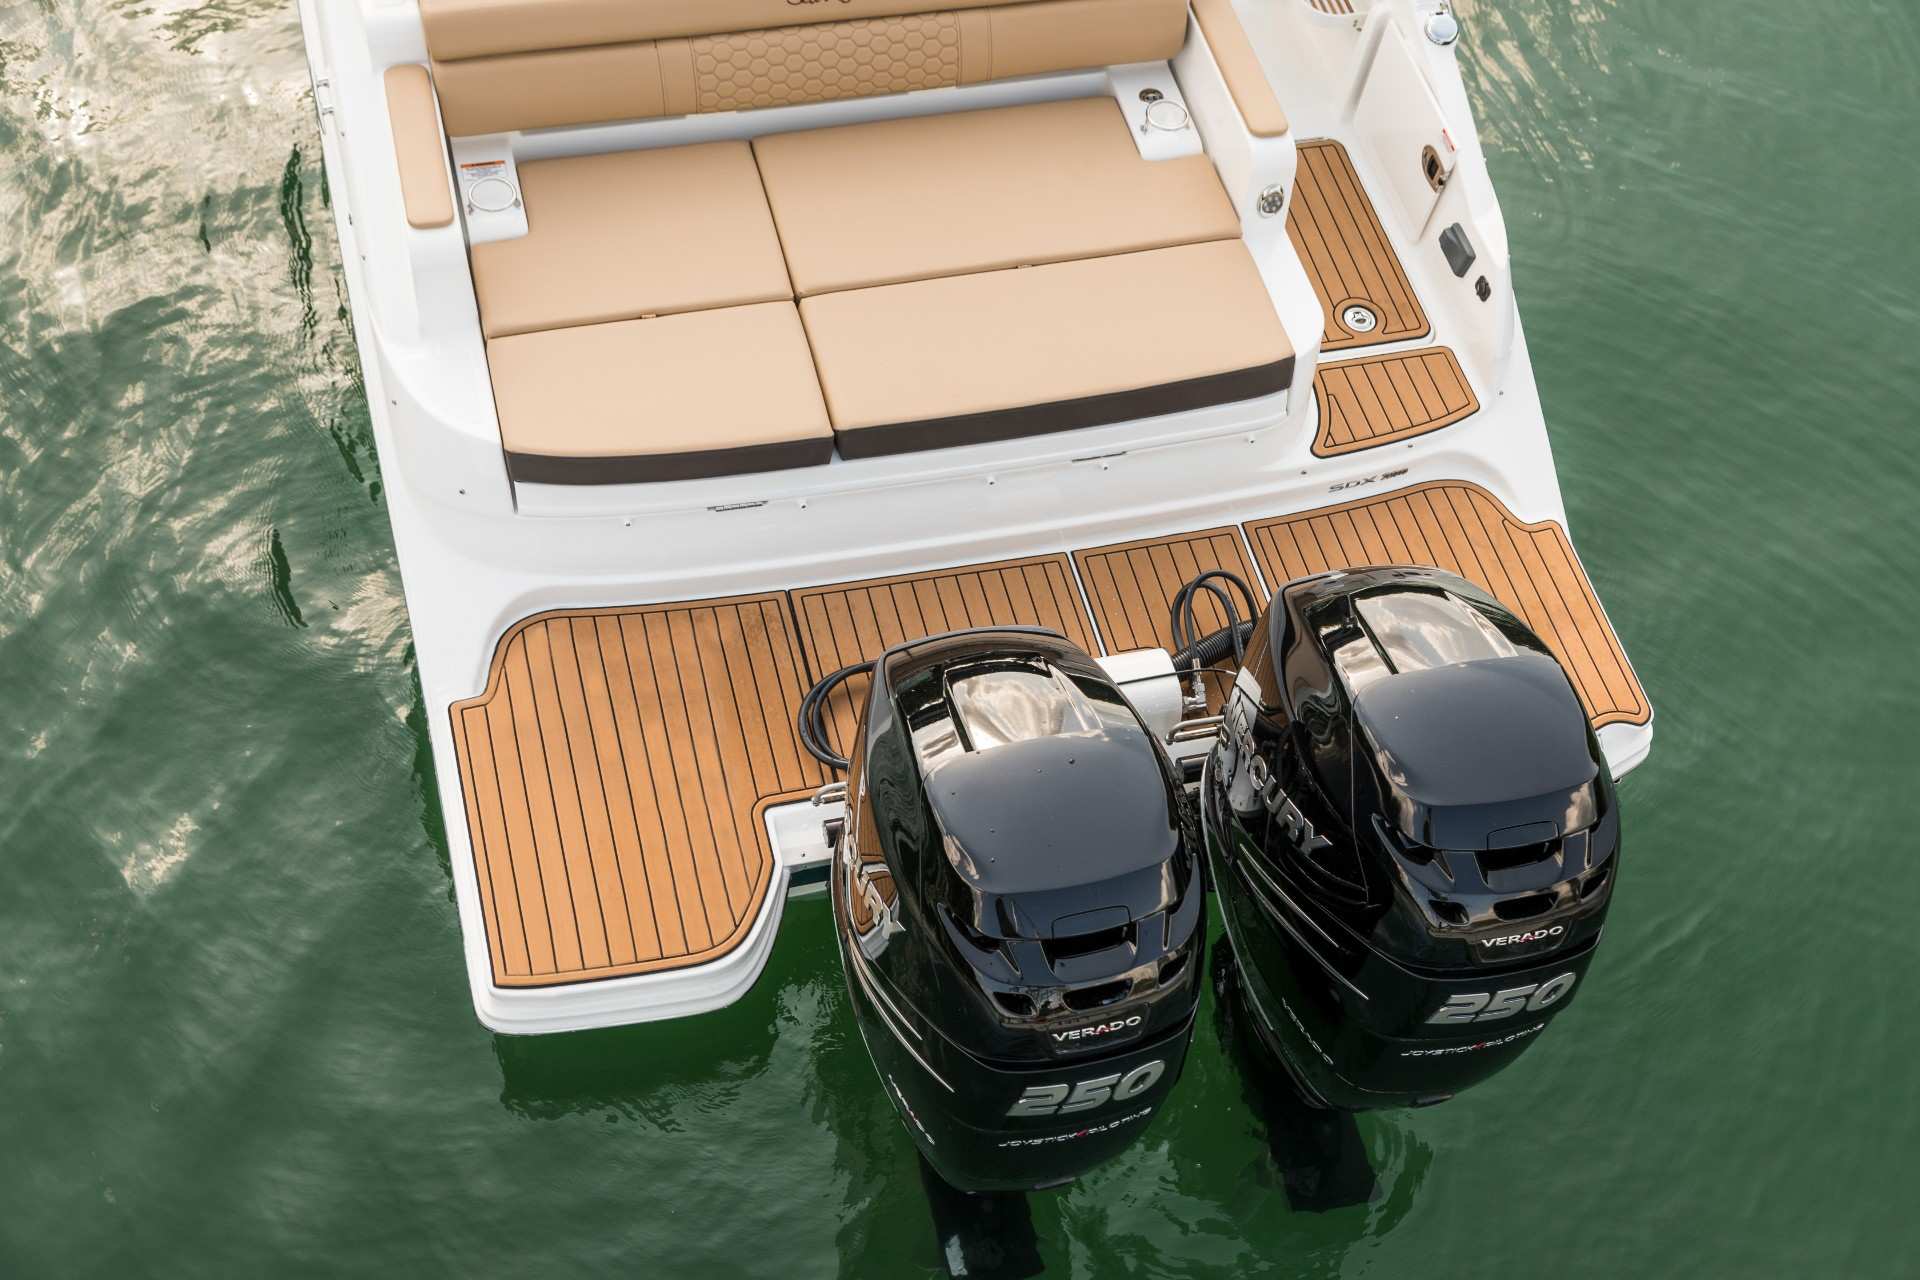 SDX 290 Outboard engines